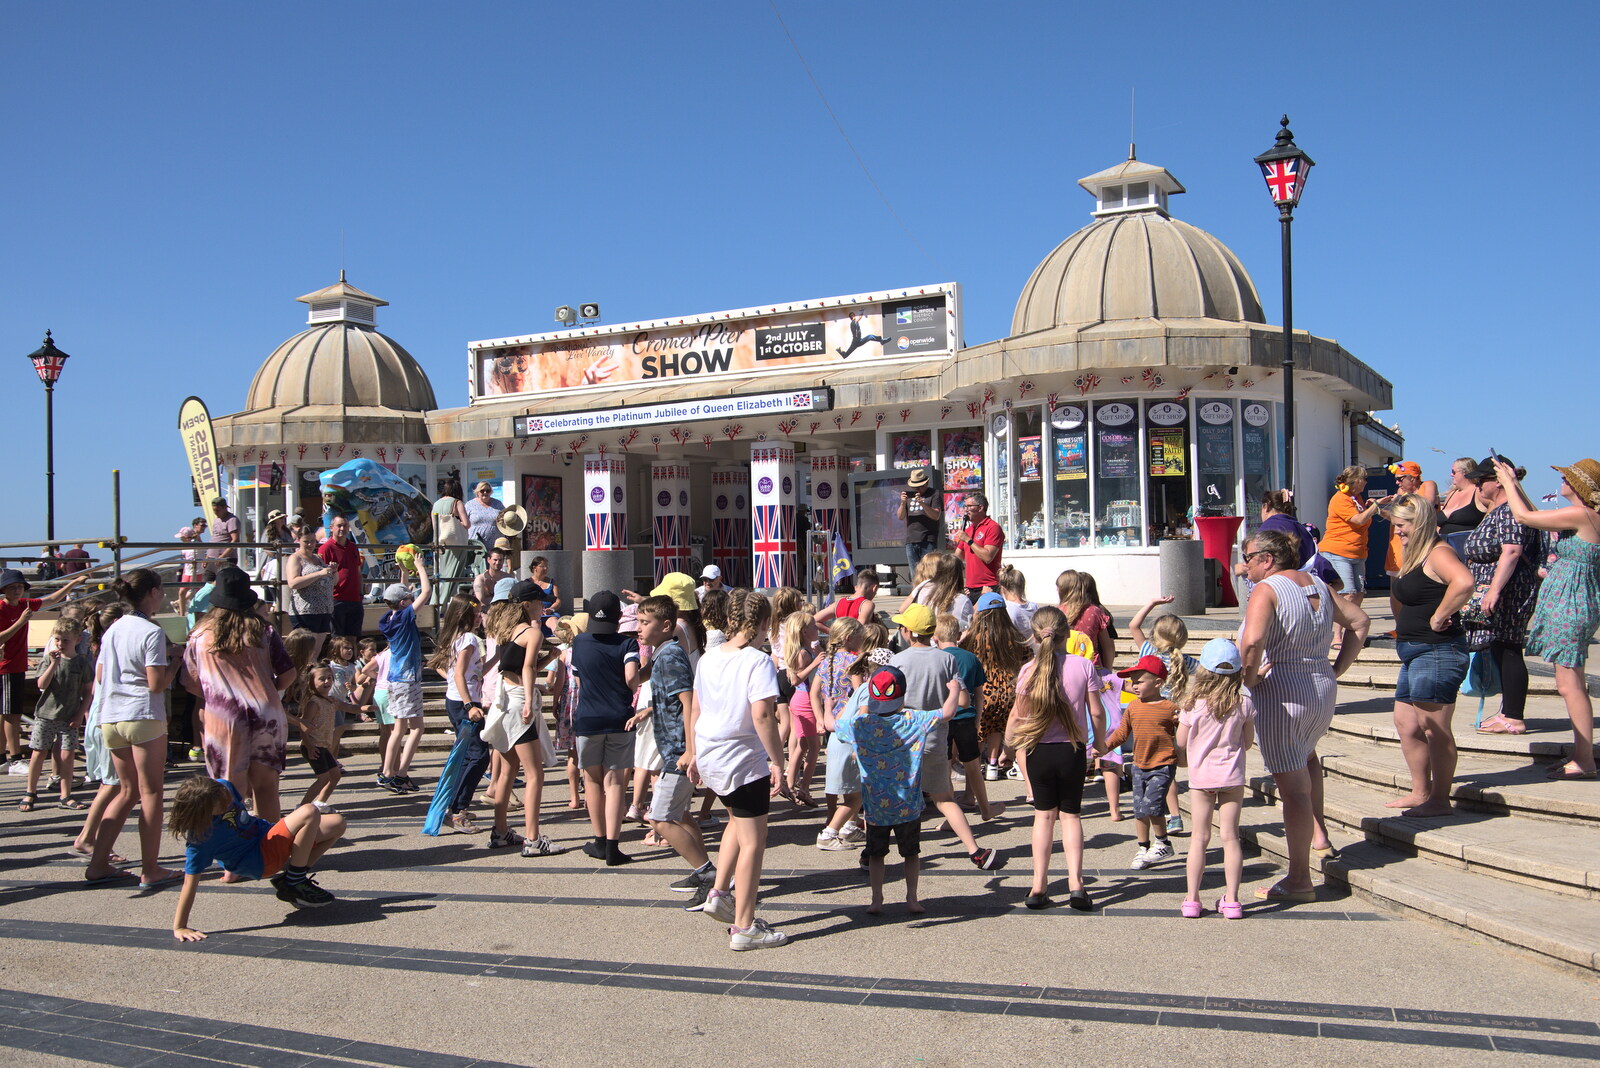 There's a gathering outside Cromer Pier from Camping at Forest Park, Cromer, Norfolk - 12th August 2022